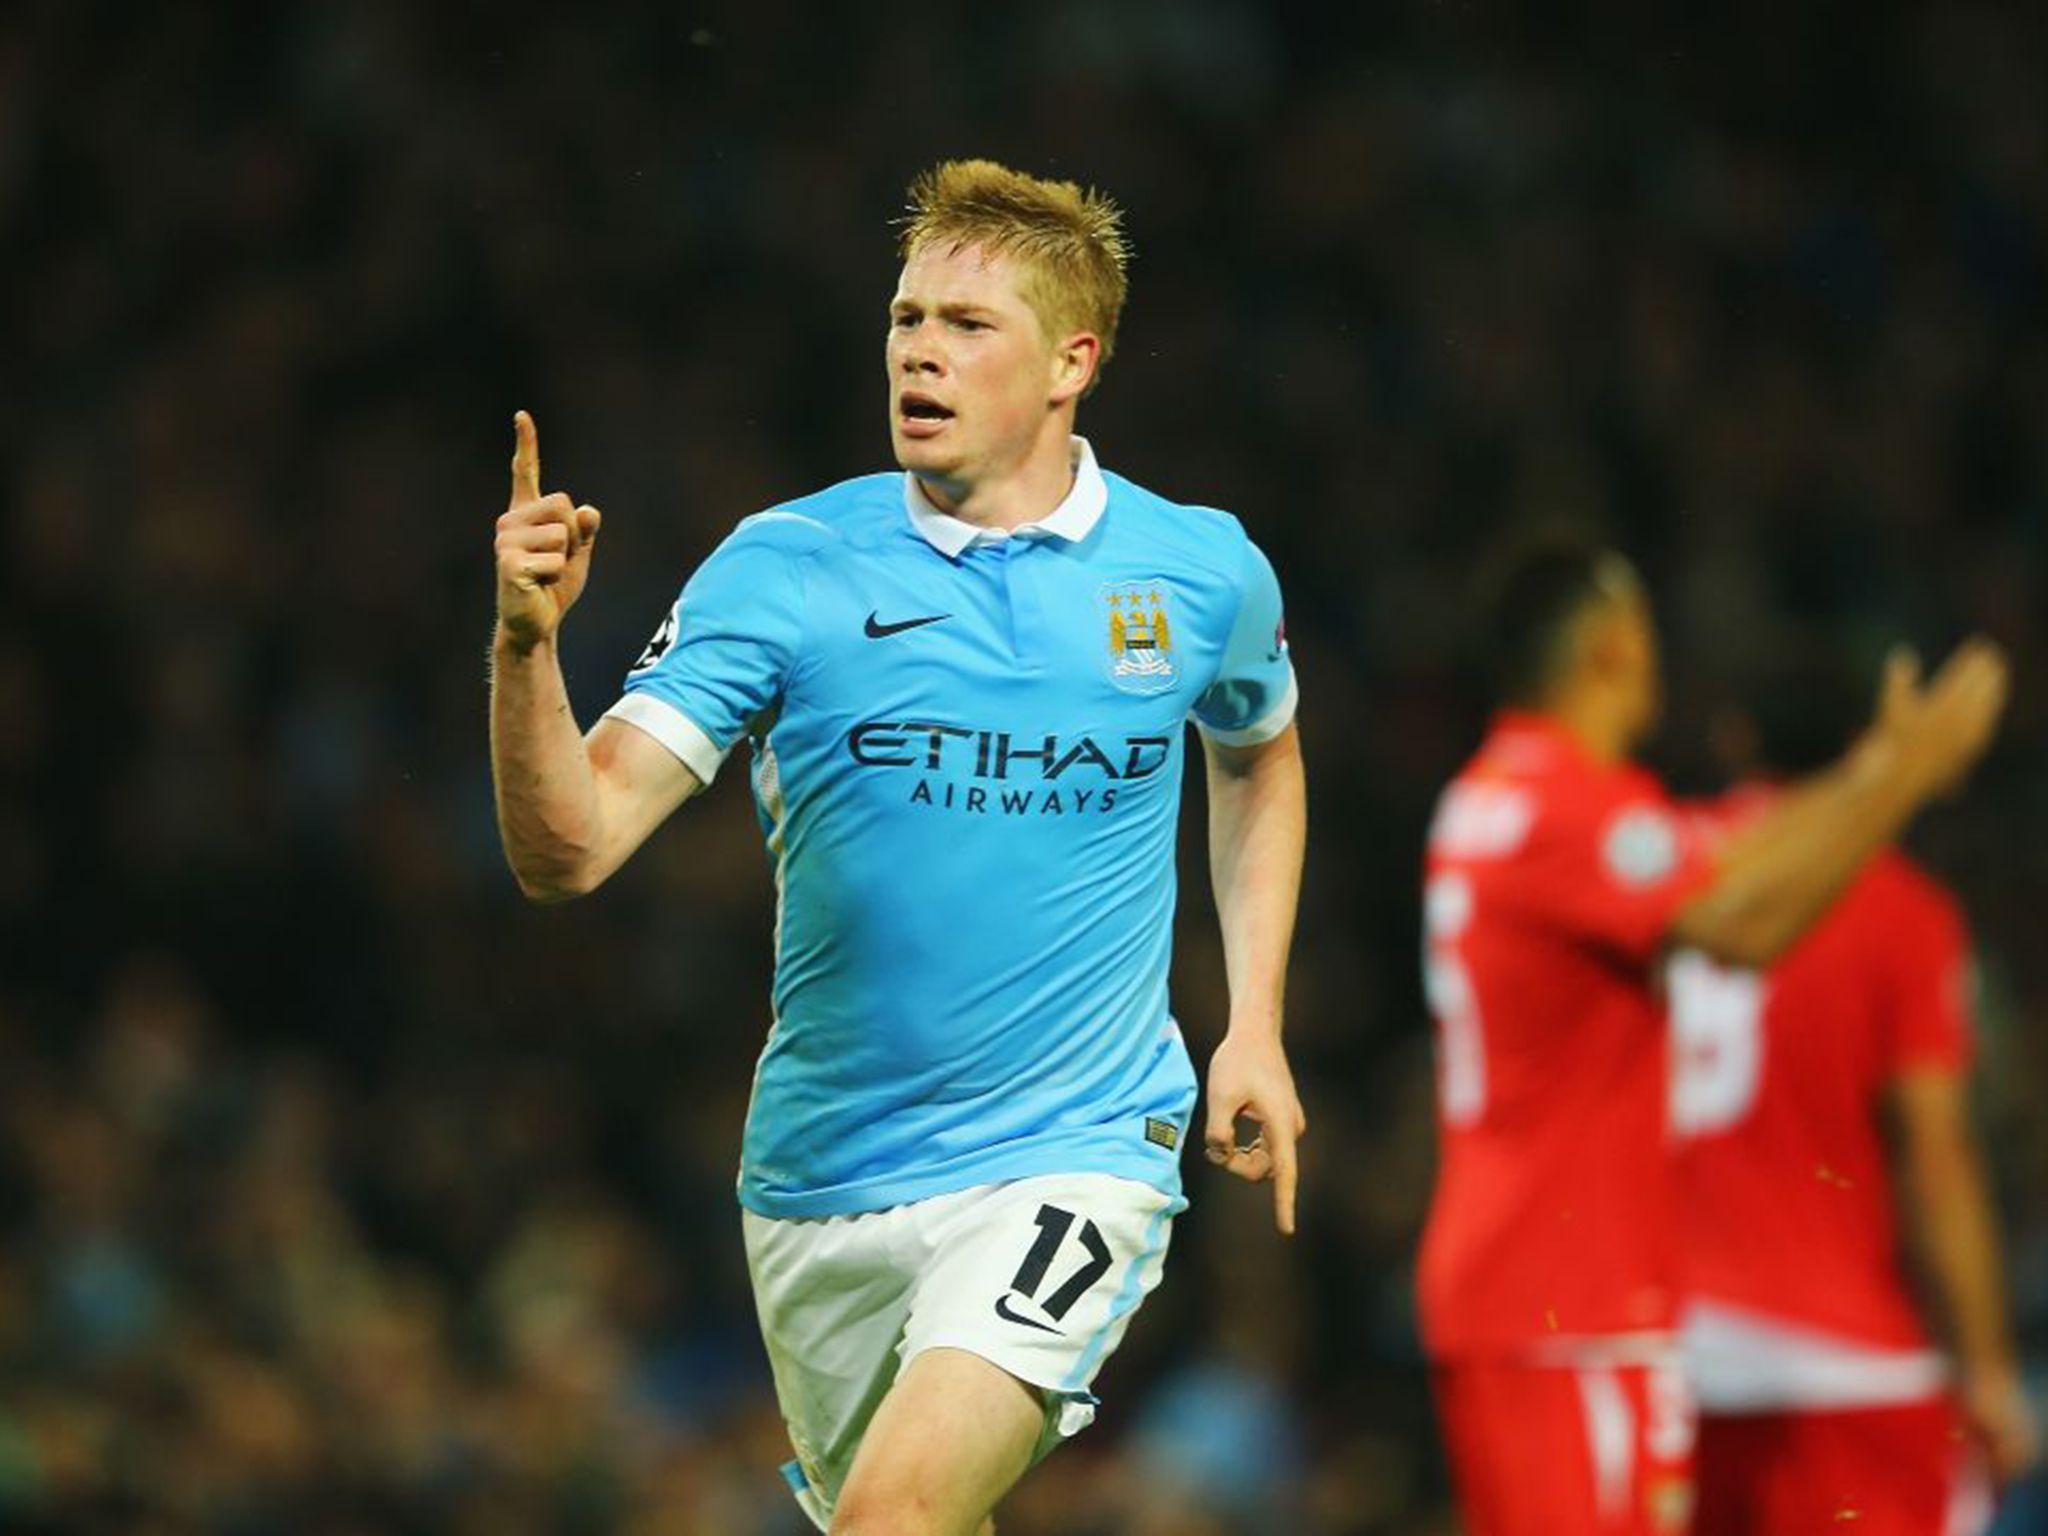 Kevin De Bruyne Image Wallpaper Background of Your Choice